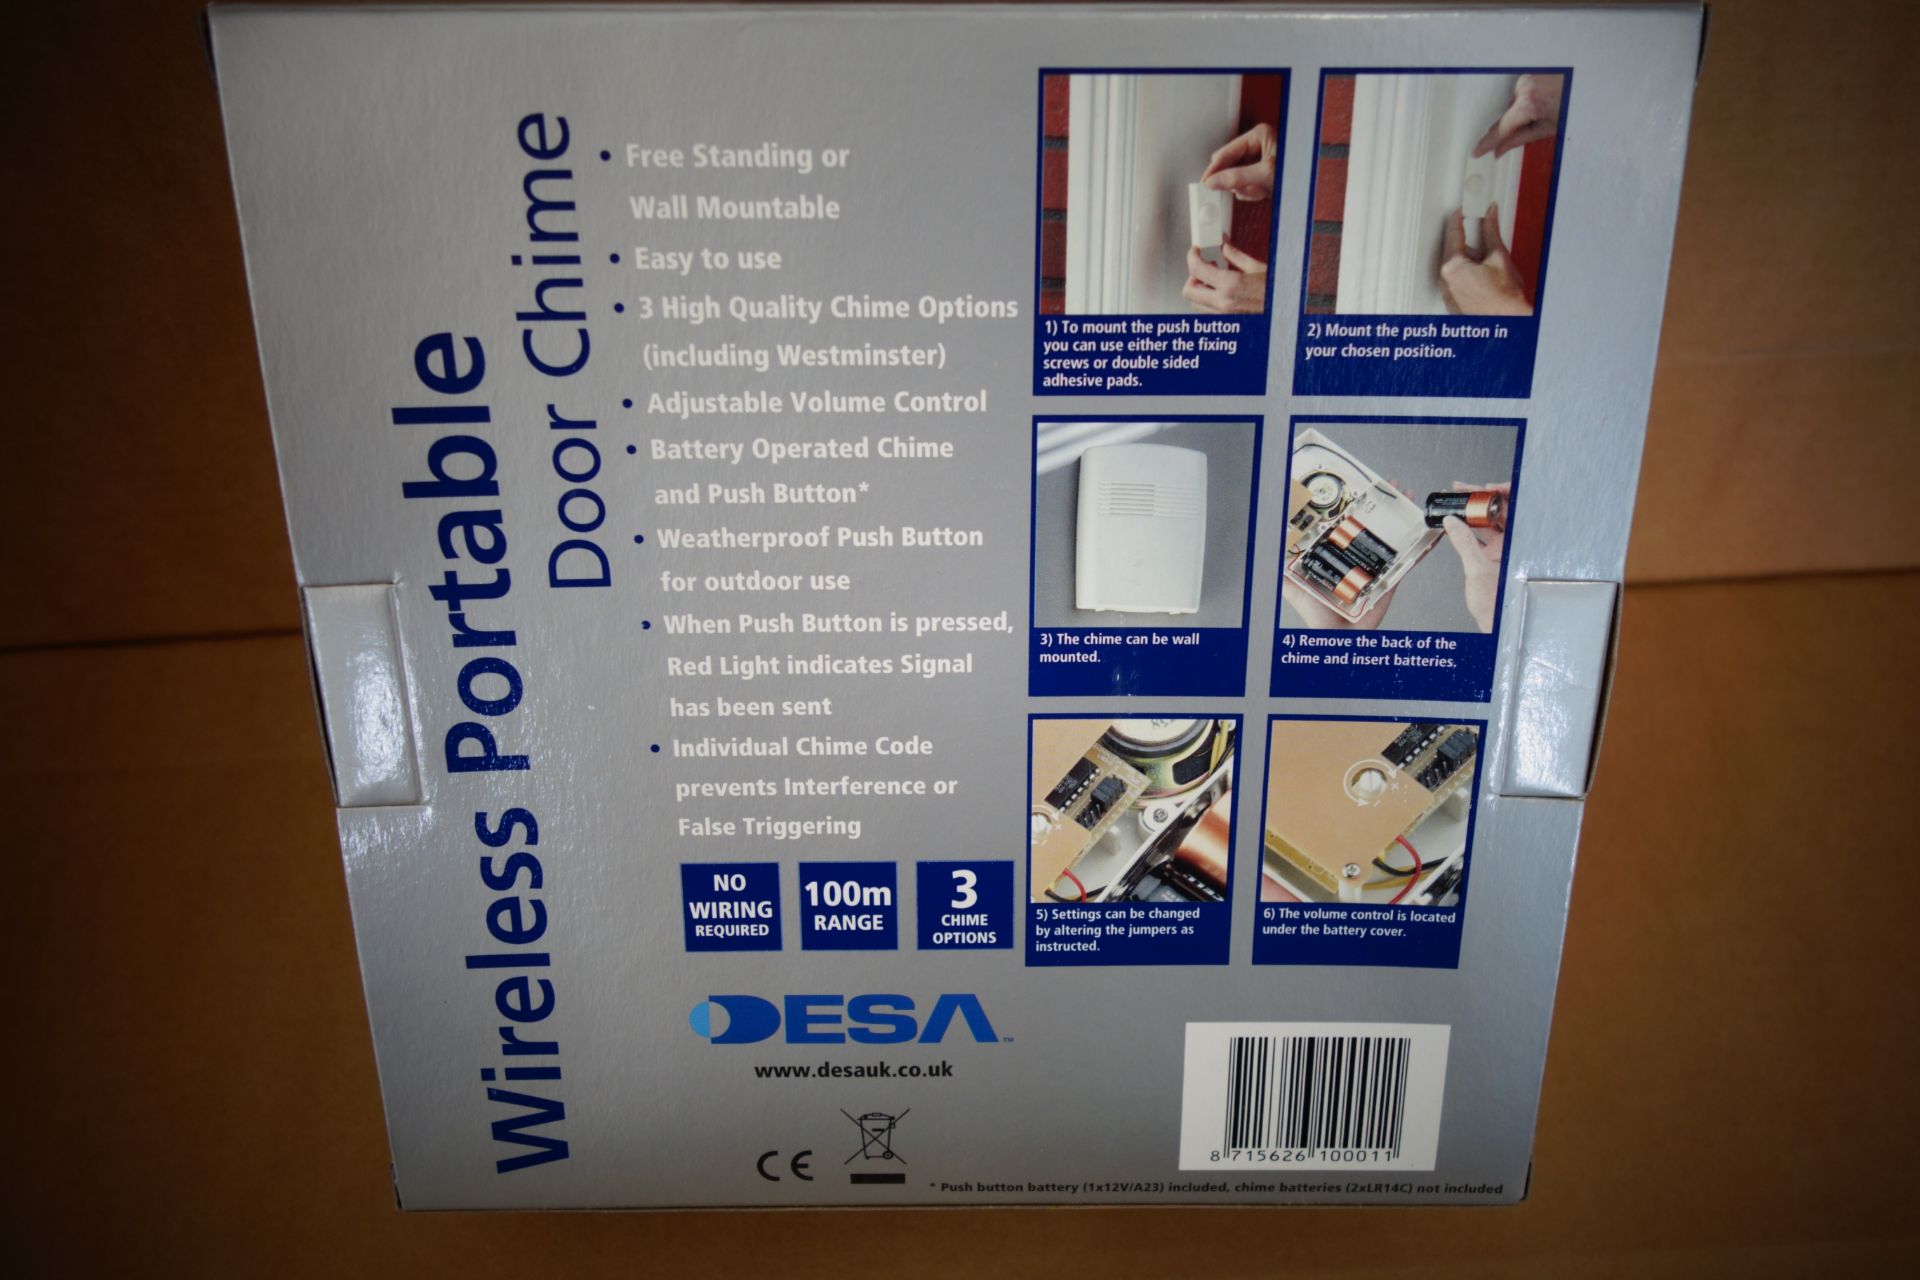 10 x Brand New Desa Wireless Portable Door Chimes - 100m Range. 3 Chime Options. No Wiring Required. - Image 3 of 3